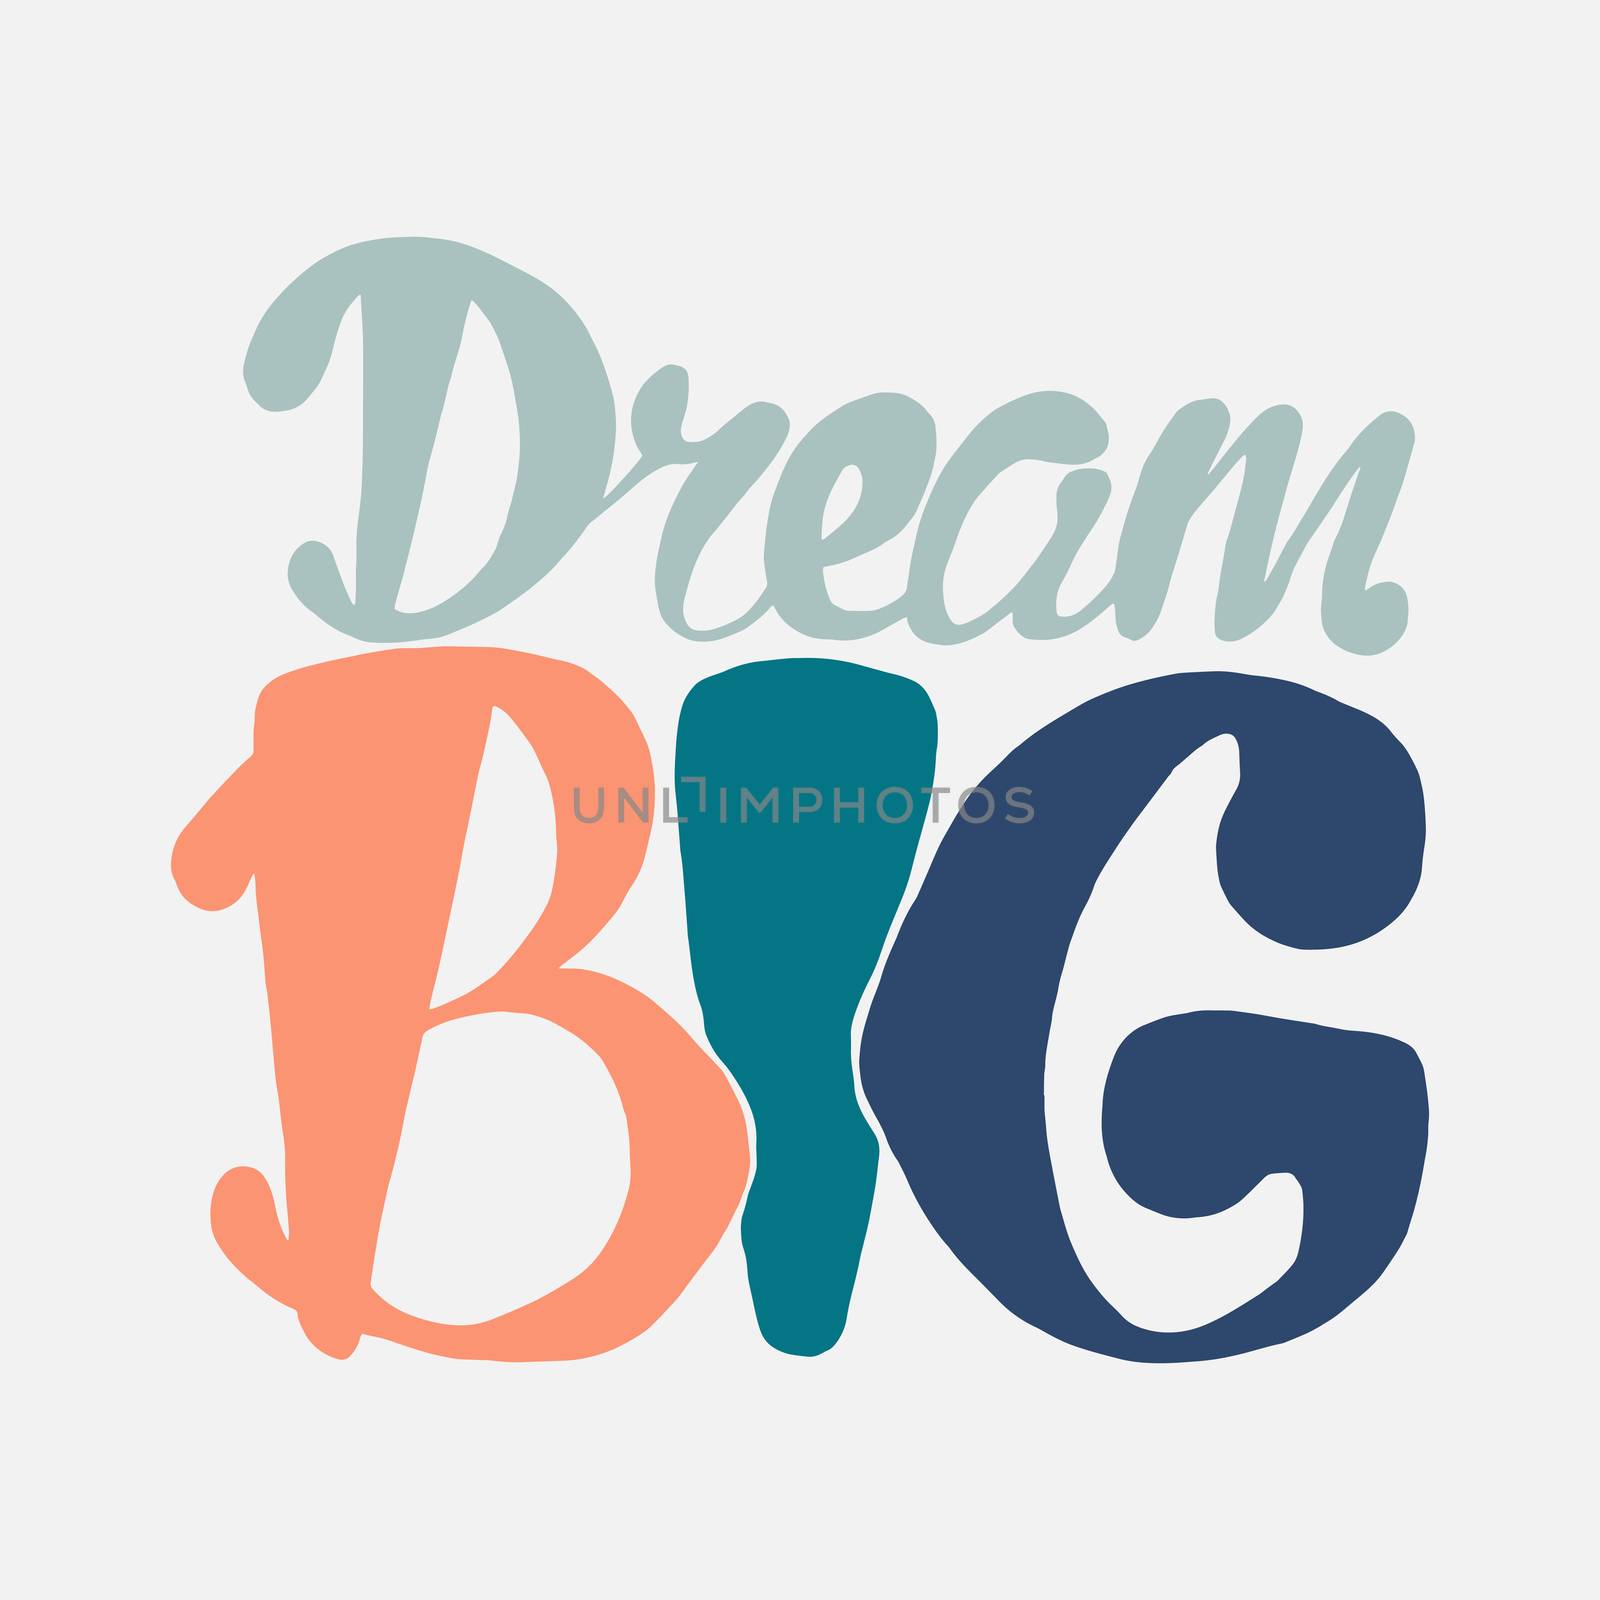 Motivation and Dream Lettering Concept. Dream Big. Vintage Calligraphic Text. Inspirational retro quote for fabric, print, invitation, decor, greeting card, poster, design element. Vector